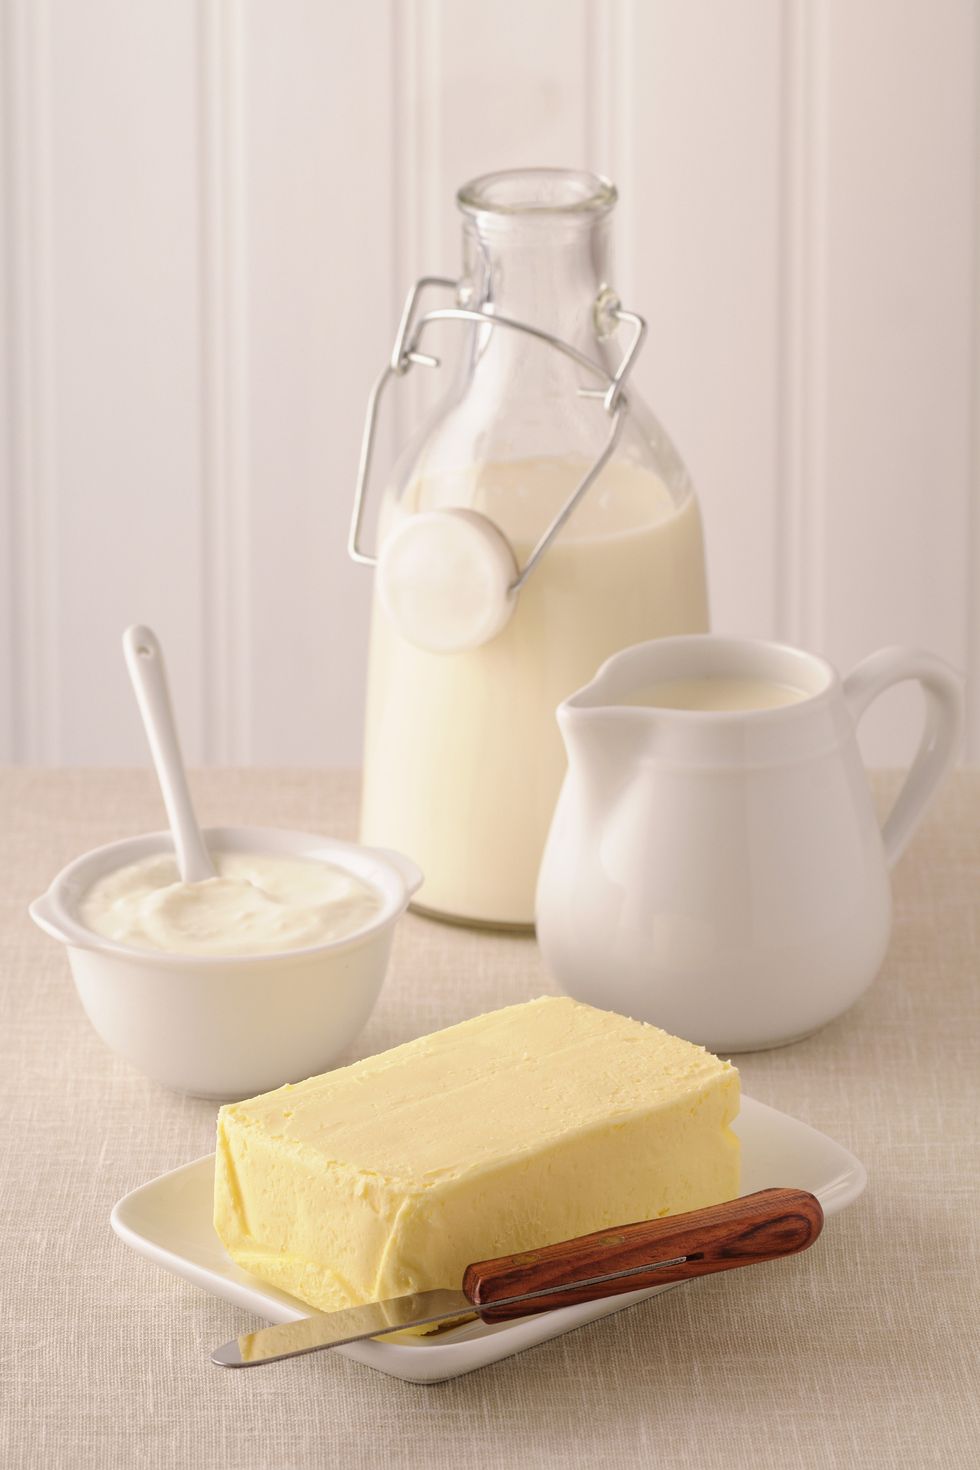 https://hips.hearstapps.com/hmg-prod/images/butter-substitute-for-heavy-cream-1585243550.jpg?crop=1xw:0.996xh;center,top&resize=980:*